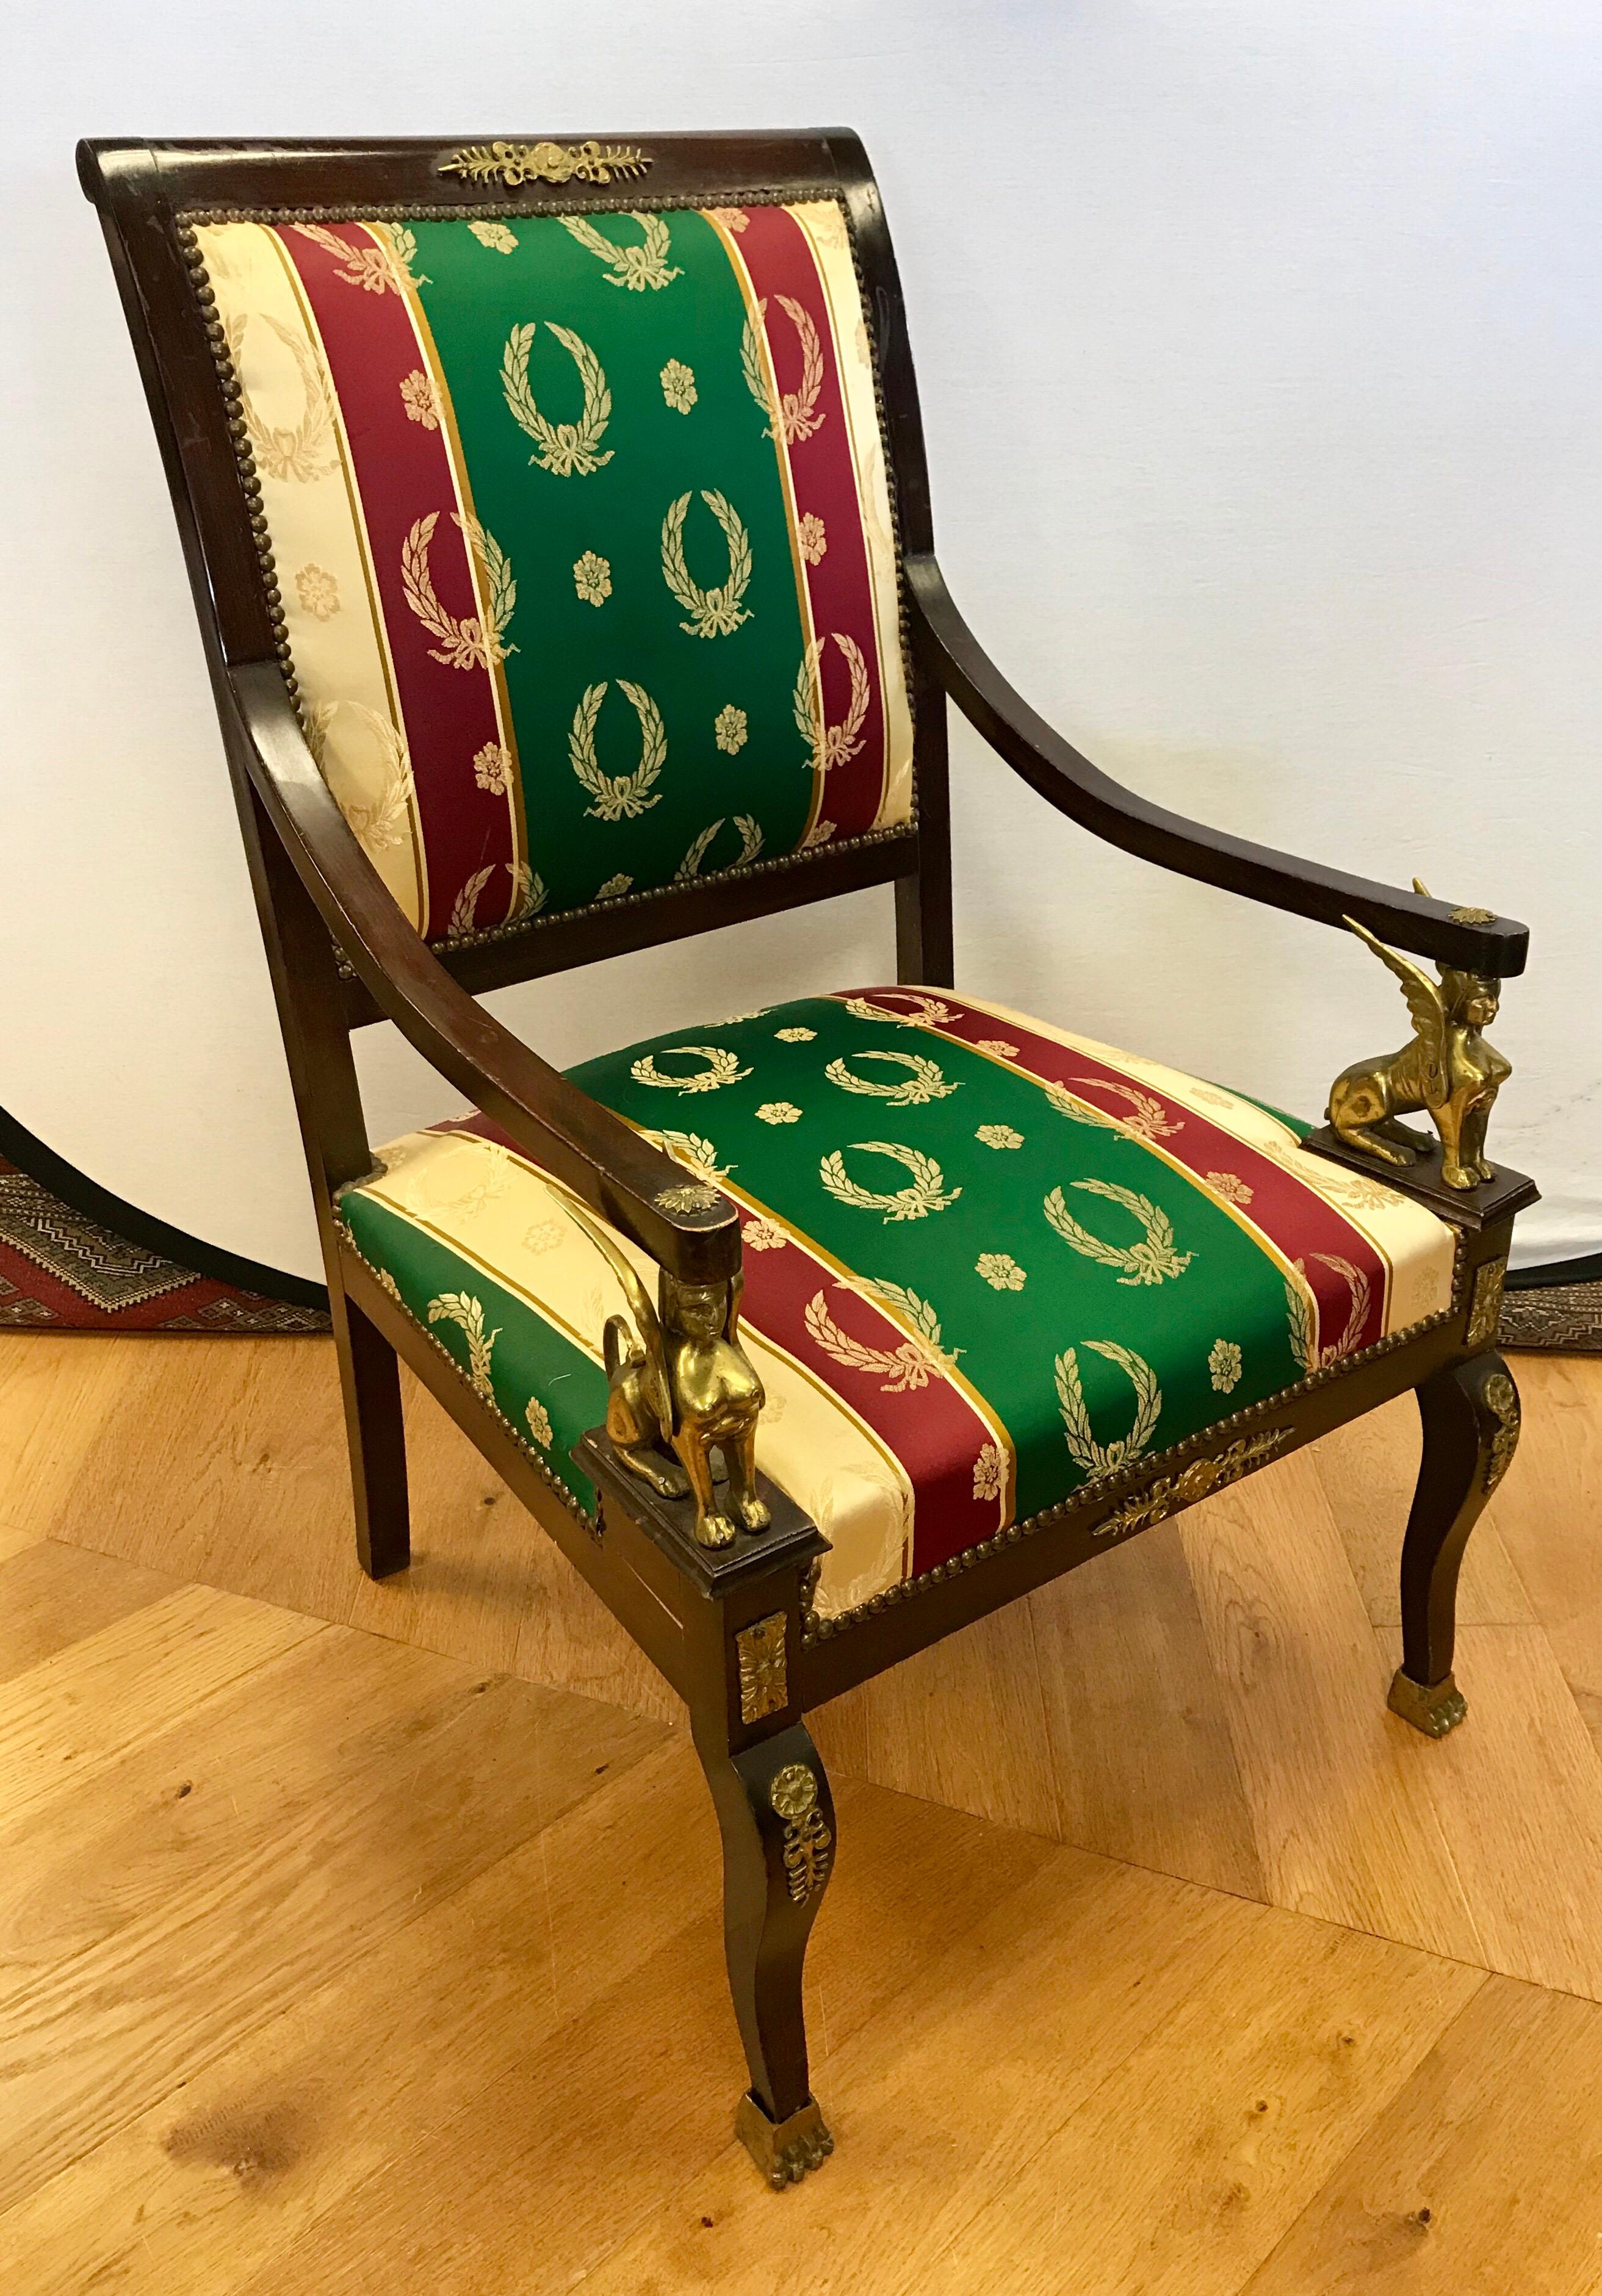 Coveted pair of Egyptian Revival mahogany nailhead arm chairs with gilt bronze mounts. They feature highly decorative Egyptian Revival/Empire touches such as sphinxes, laurels and footings all done in bronze.

They were made in the mid-20th